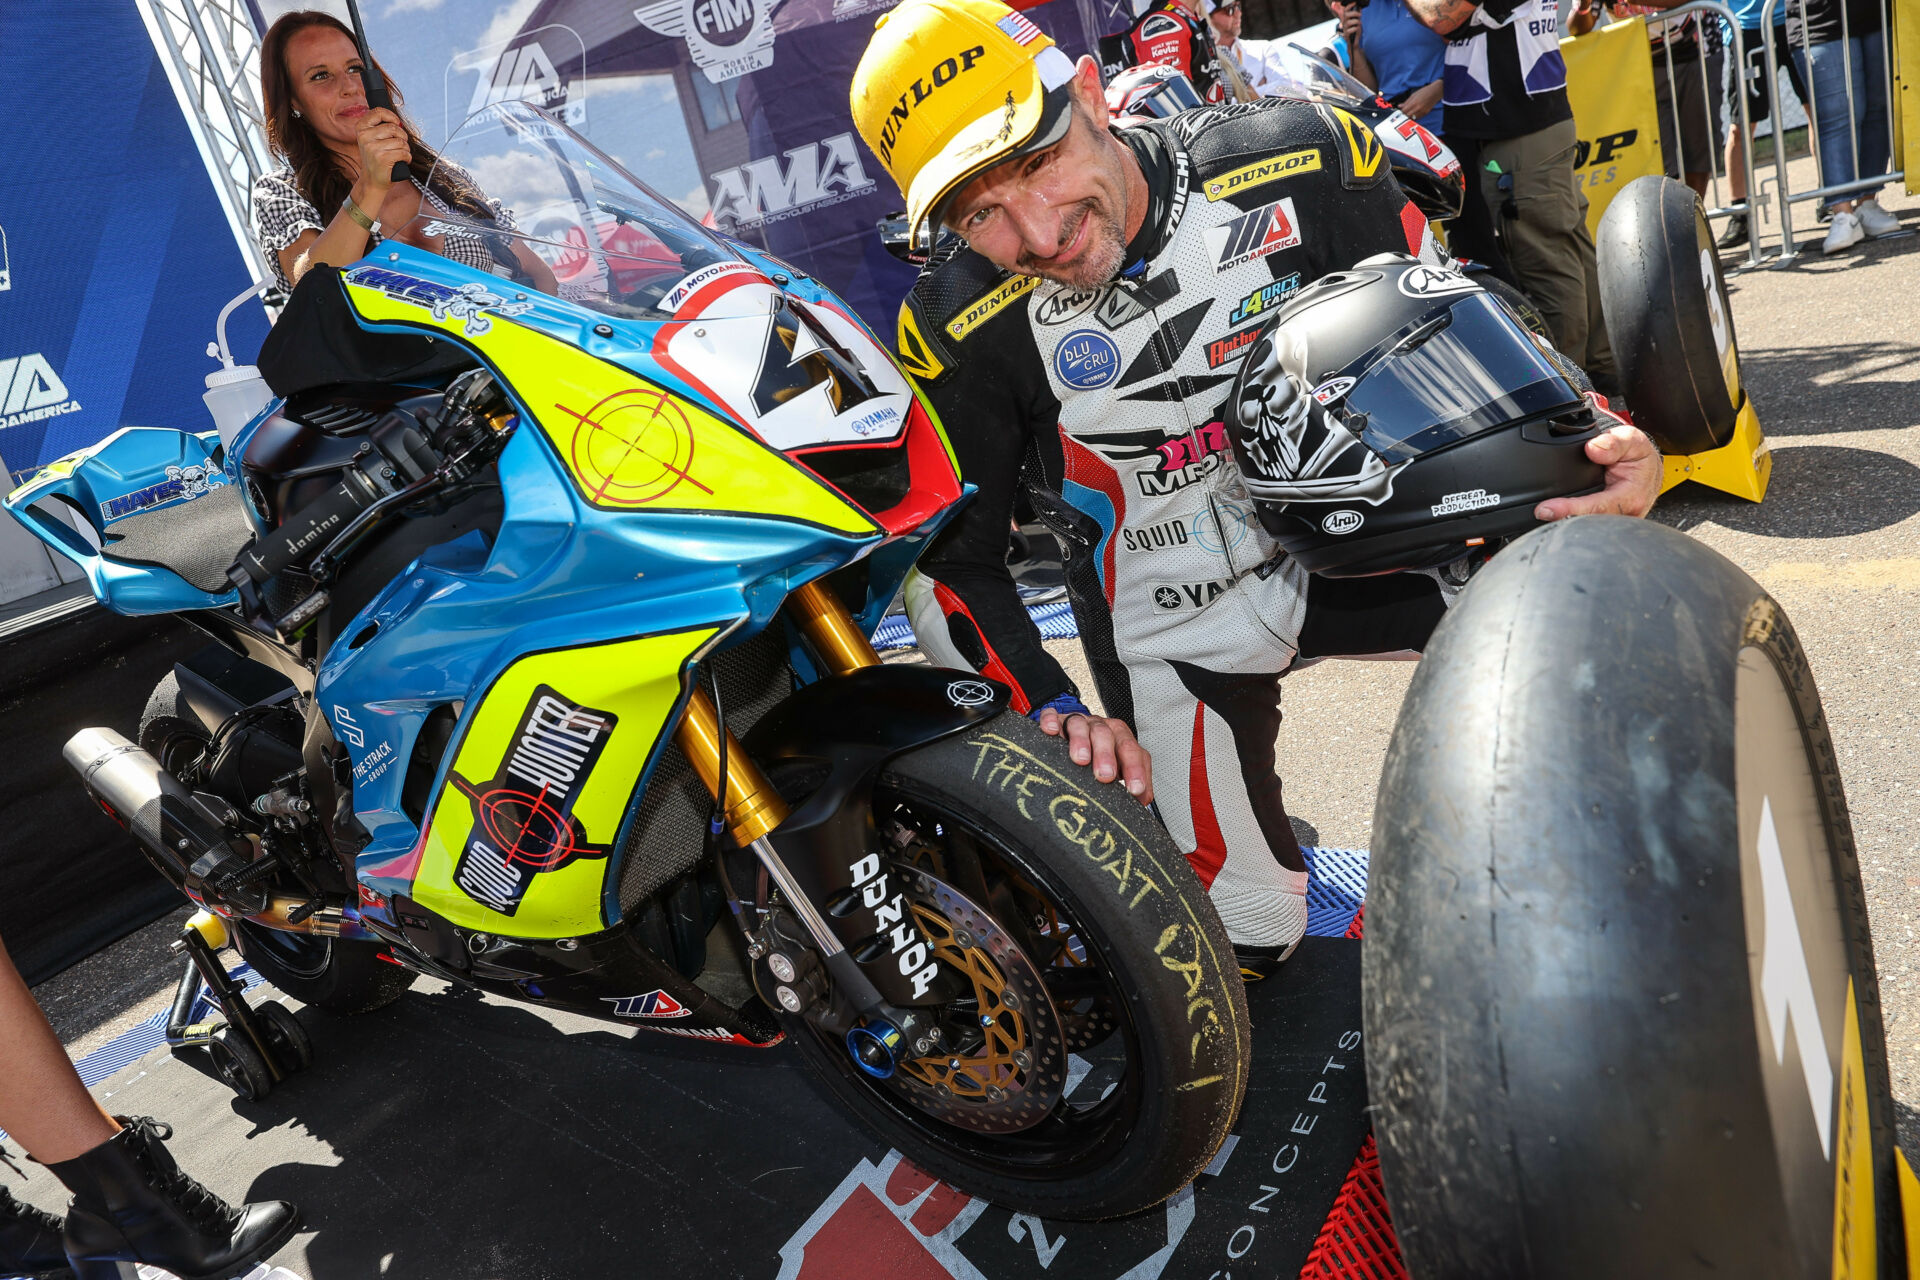 Dunlop Sportmax Slicks, as used by Josh Hayes, the all-time AMA/MotoAmerica career race win leader. Photo by Brian J. Nelson.